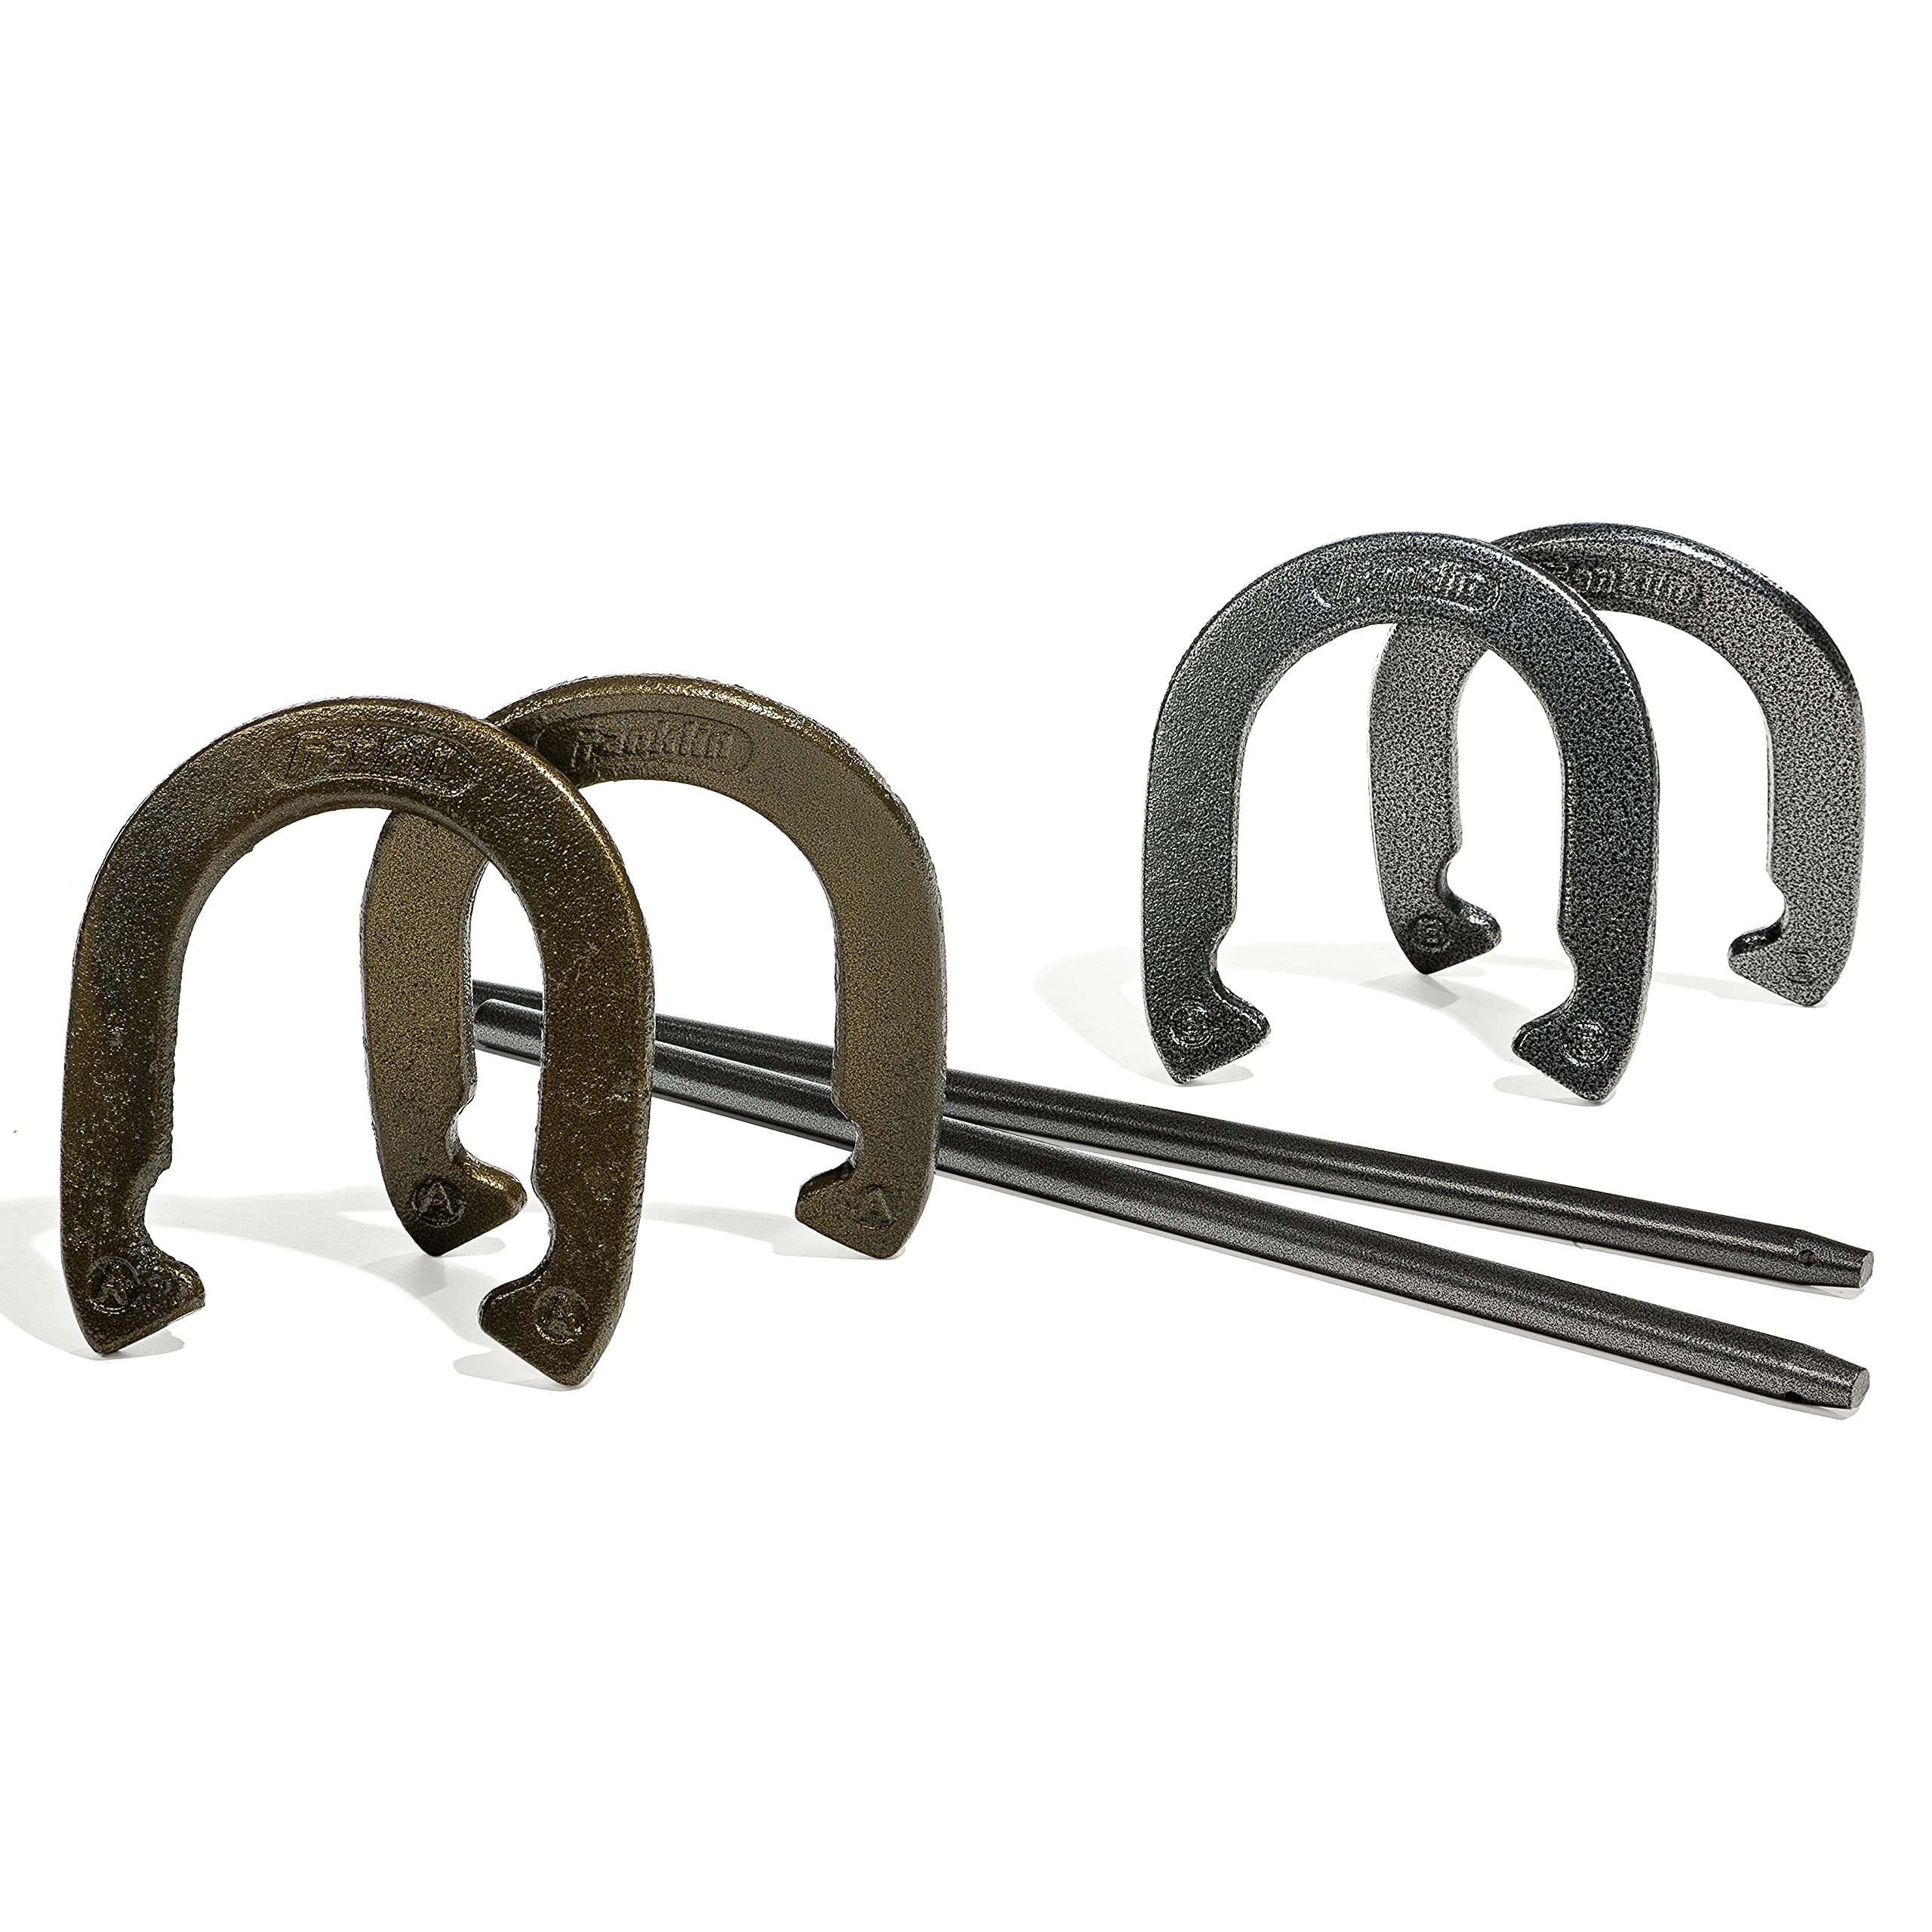 YDDS Horseshoes Outside Game Set-Portable Outdoor Horseshoe Set Includes 4  Professional Solid Steel Horseshoes with Solid Steel Stakes & Carrying Bag,  Perfect for Backyard and Beach : Sports & Outdoors 